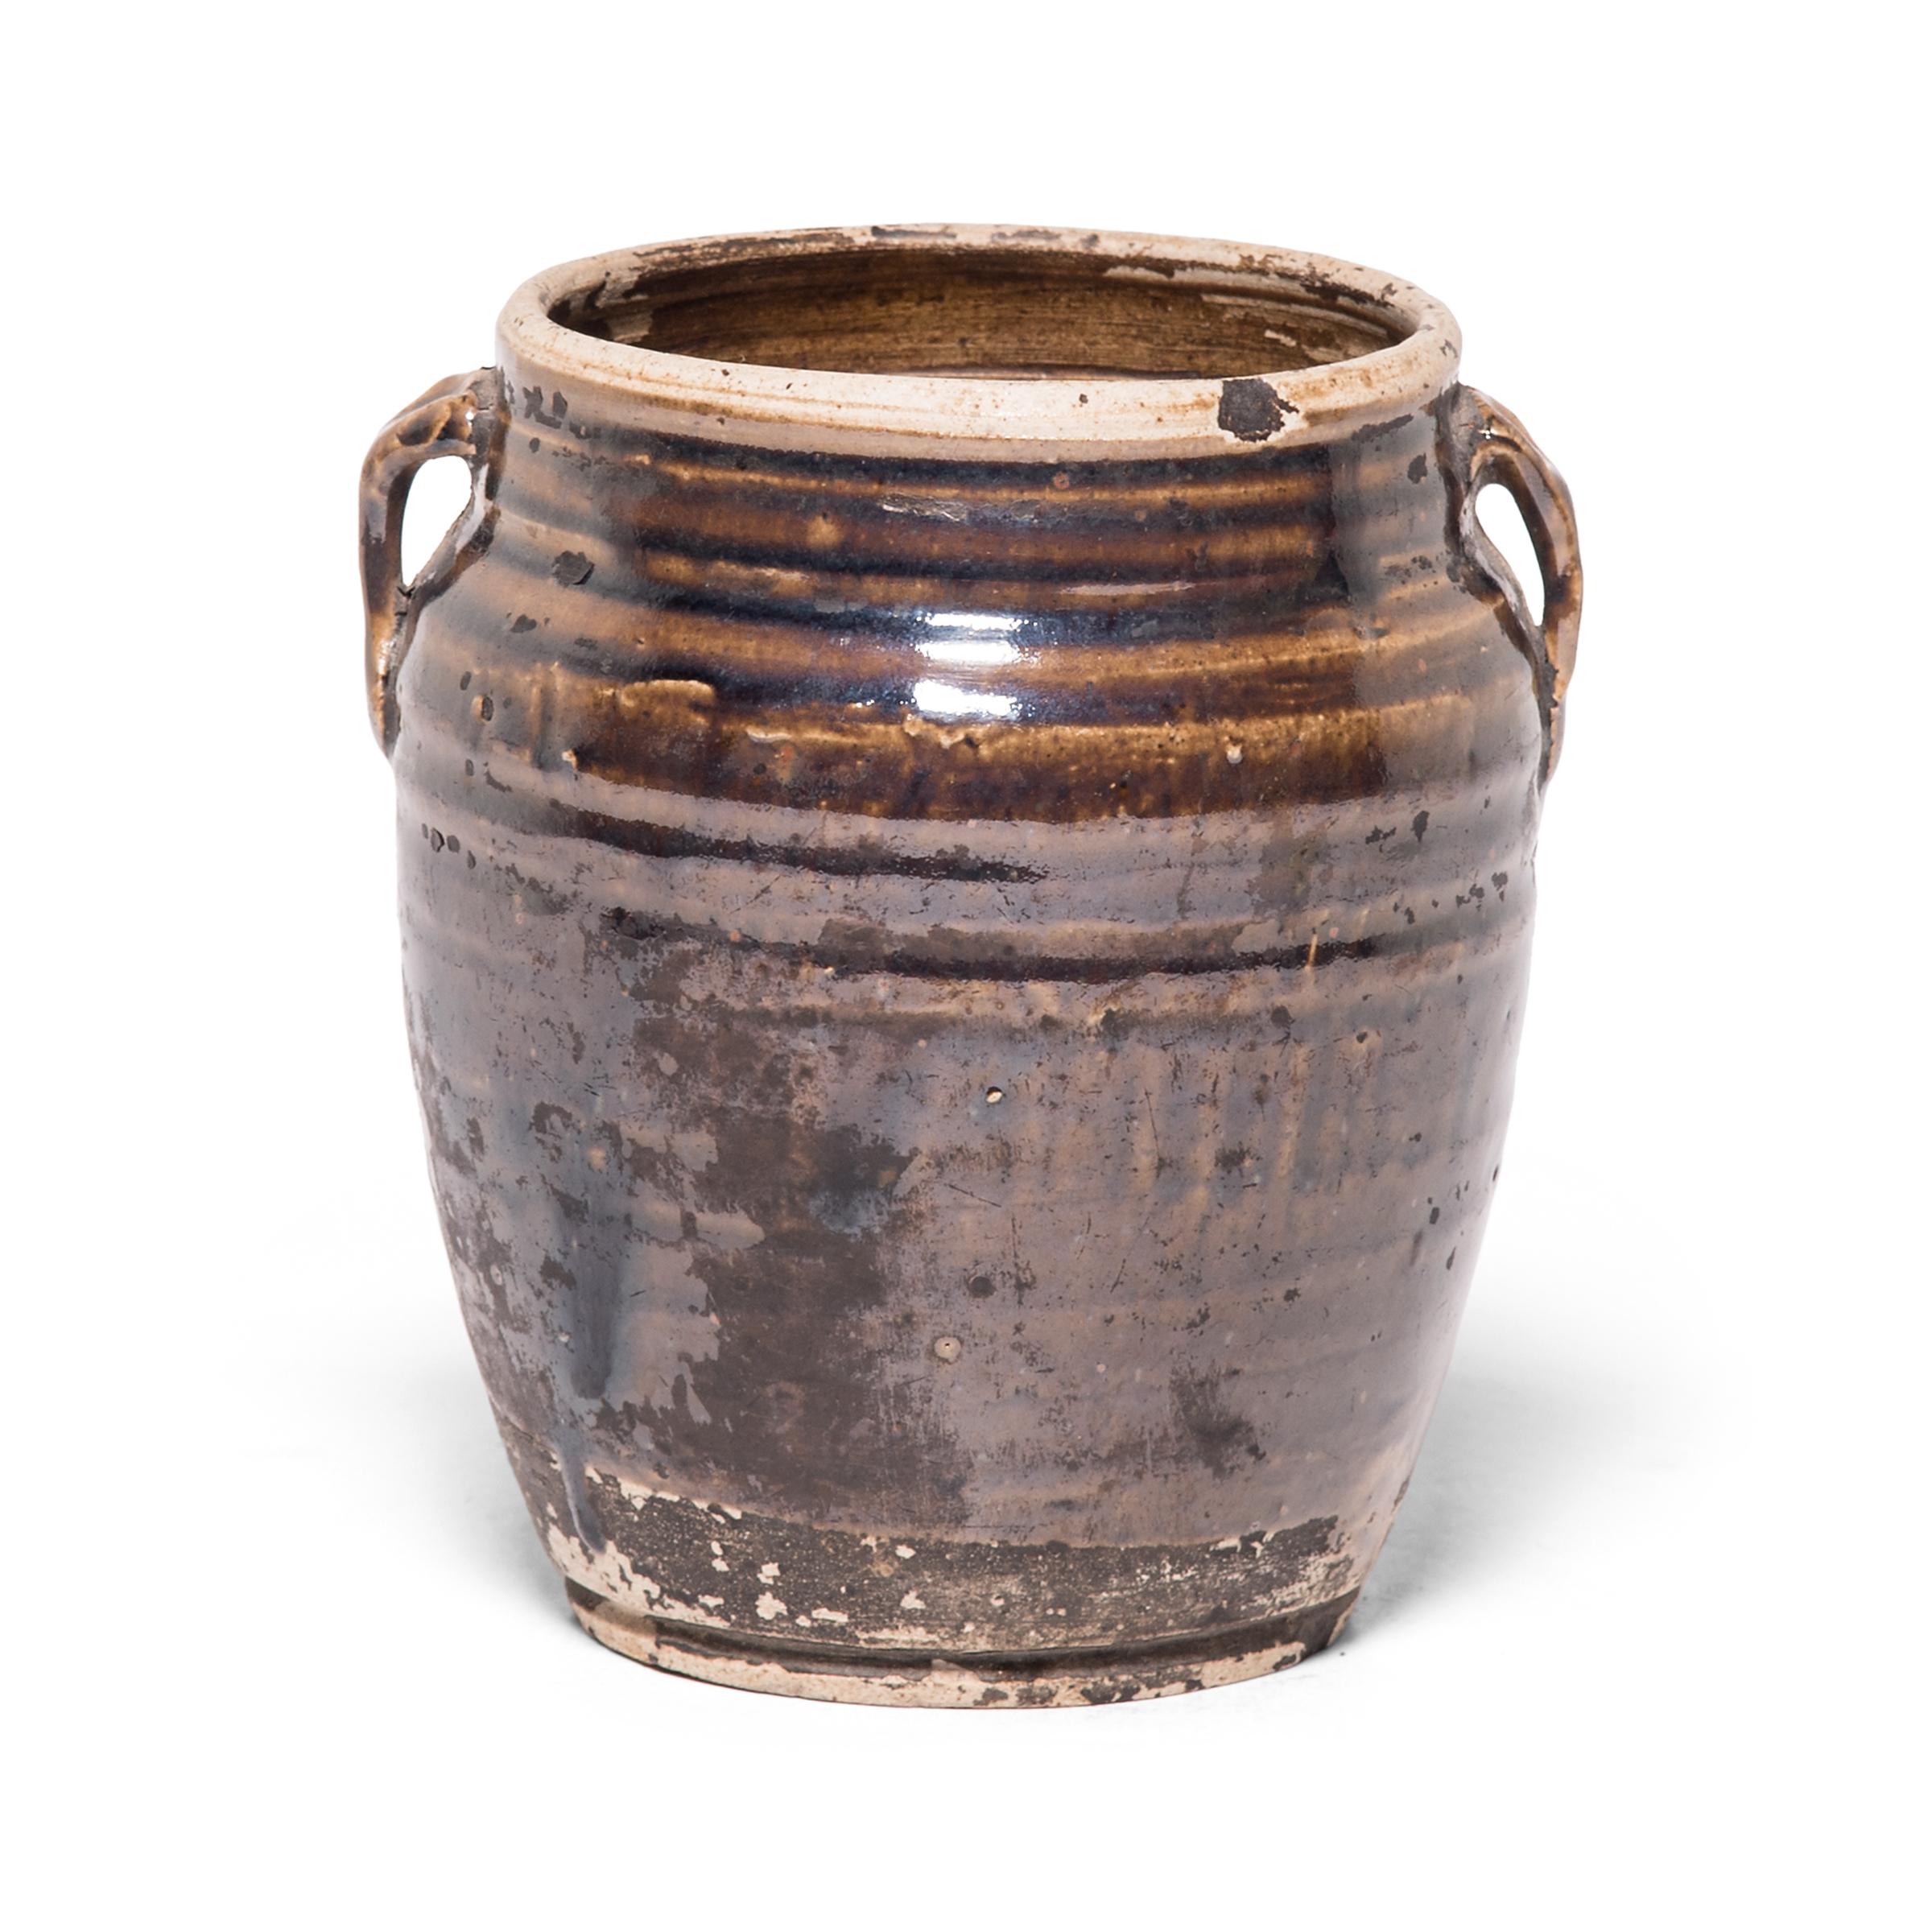 Rustic Early 20th Century Chinese Glazed Kitchen Jar